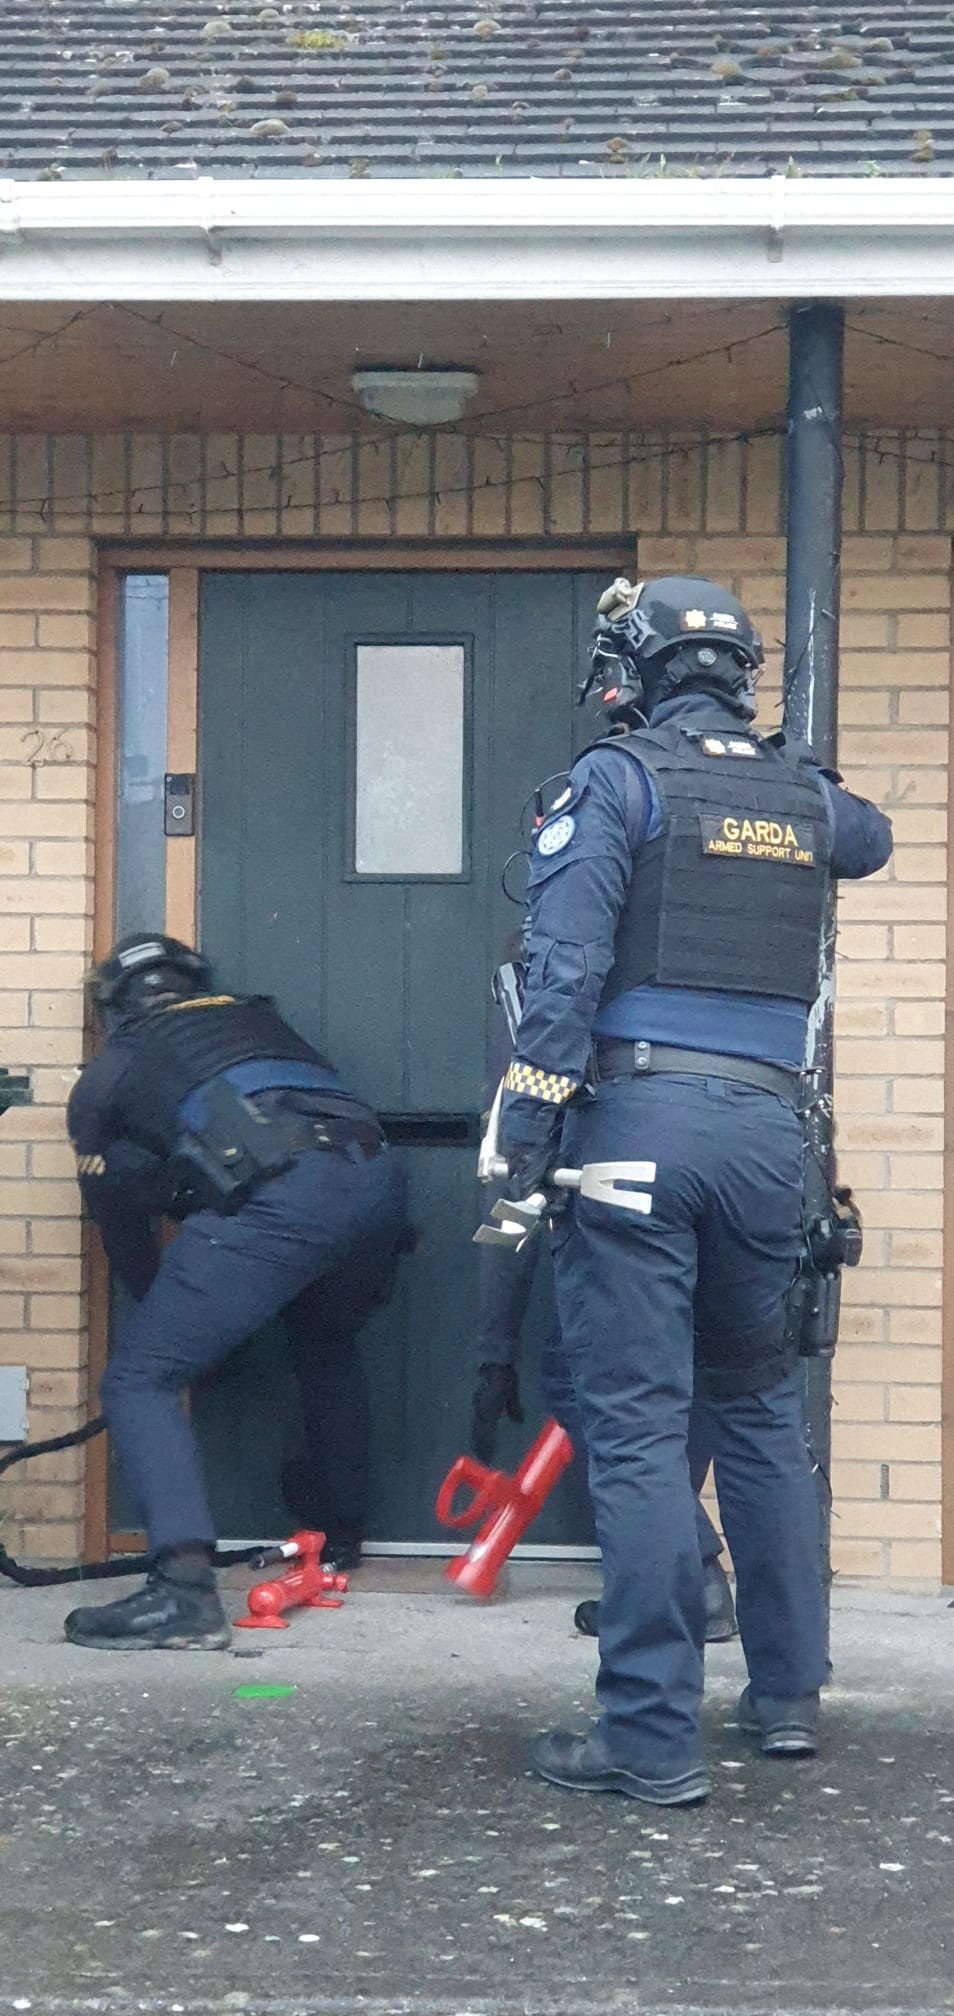 Gardaí seize Rolex and €10k in cryptocurrency in fraud operation